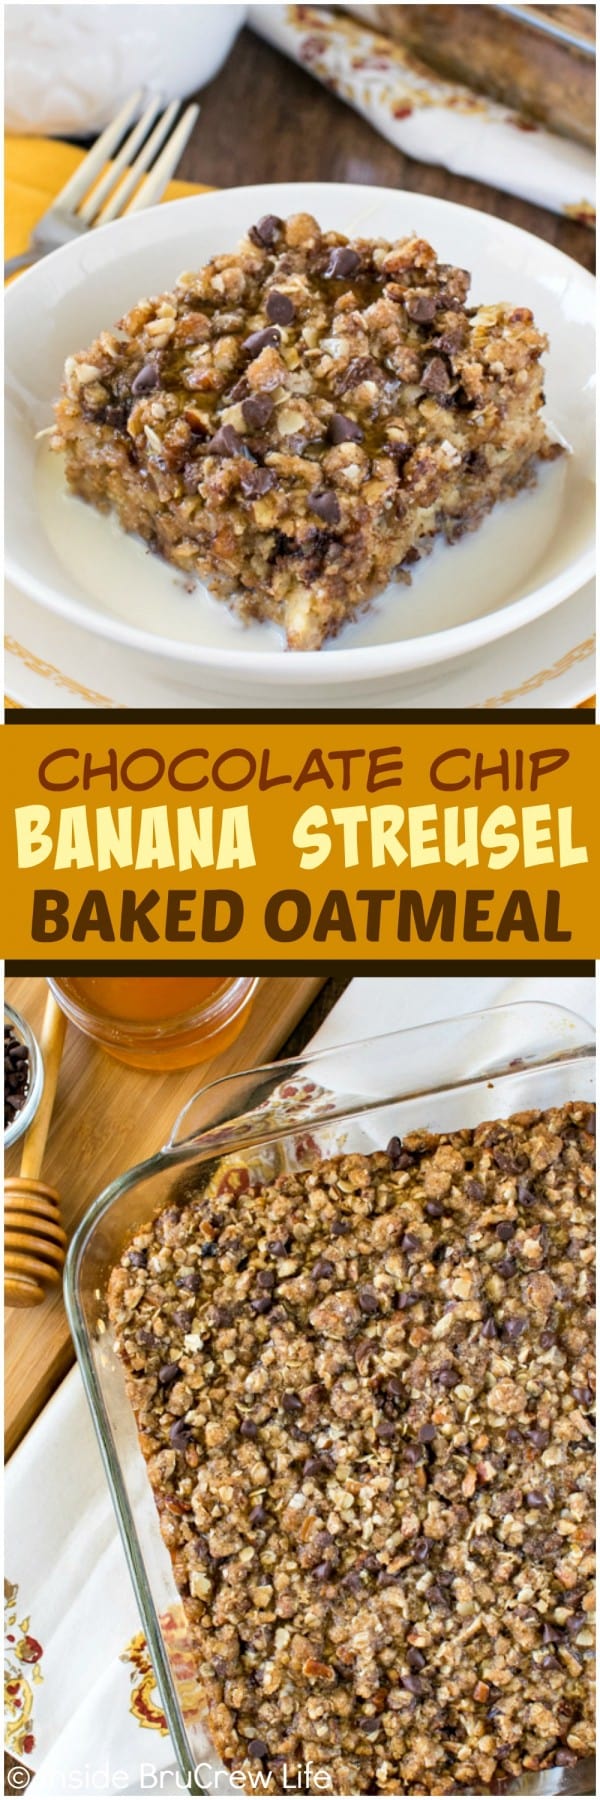 Chocolate Chip Banana Streusel Baked Oatmeal - oats, banana, and chocolate in this this warm breakfast recipe will keep you going in the morning. Try it warm with milk and honey!